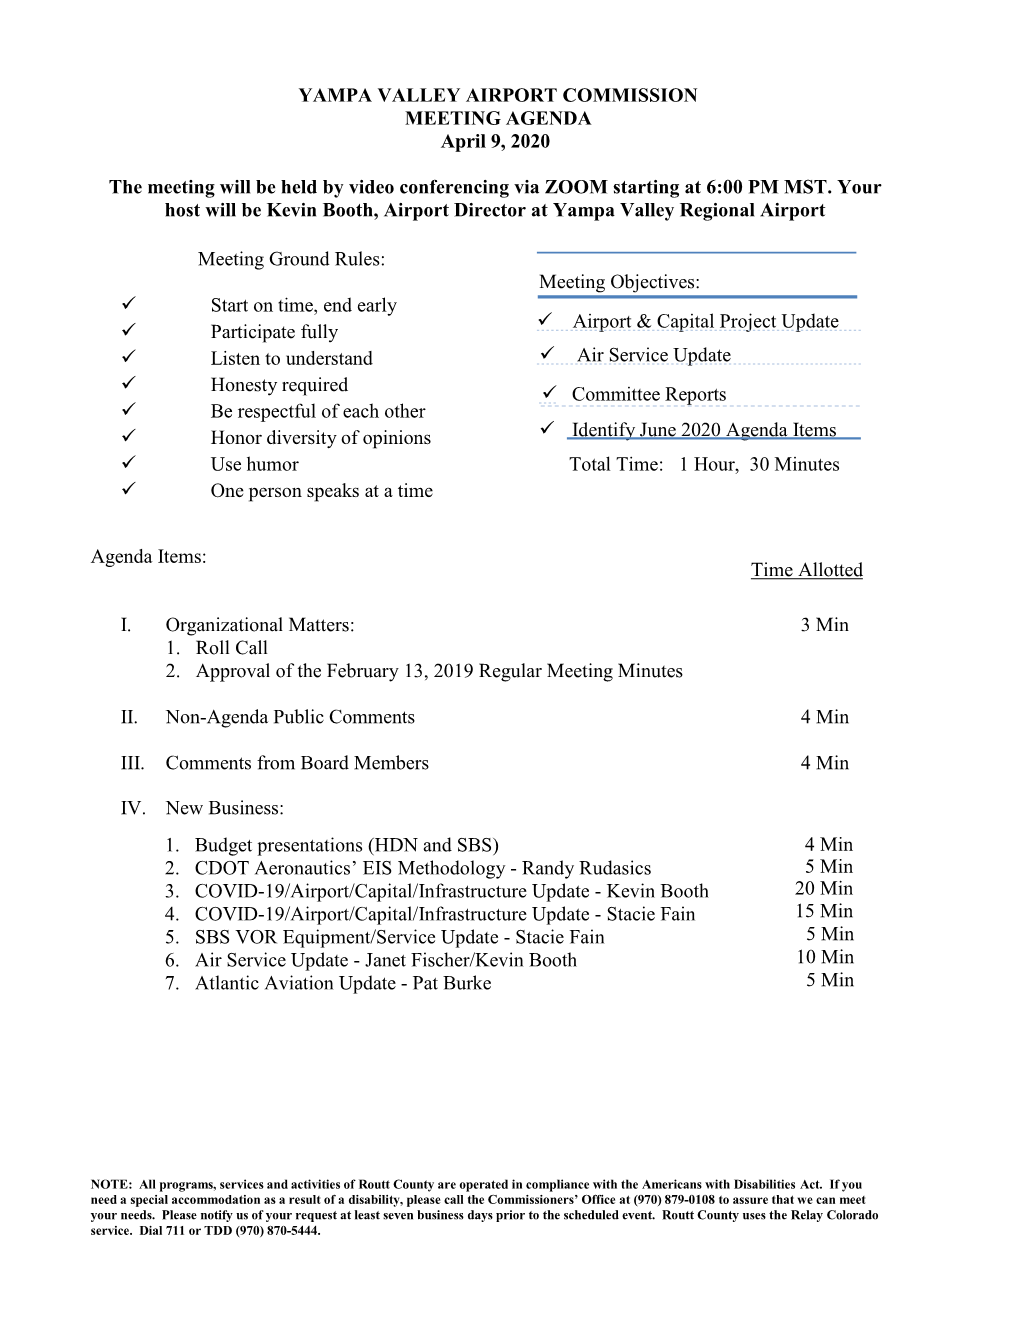 YAMPA VALLEY AIRPORT COMMISSION MEETING AGENDA April 9, 2020